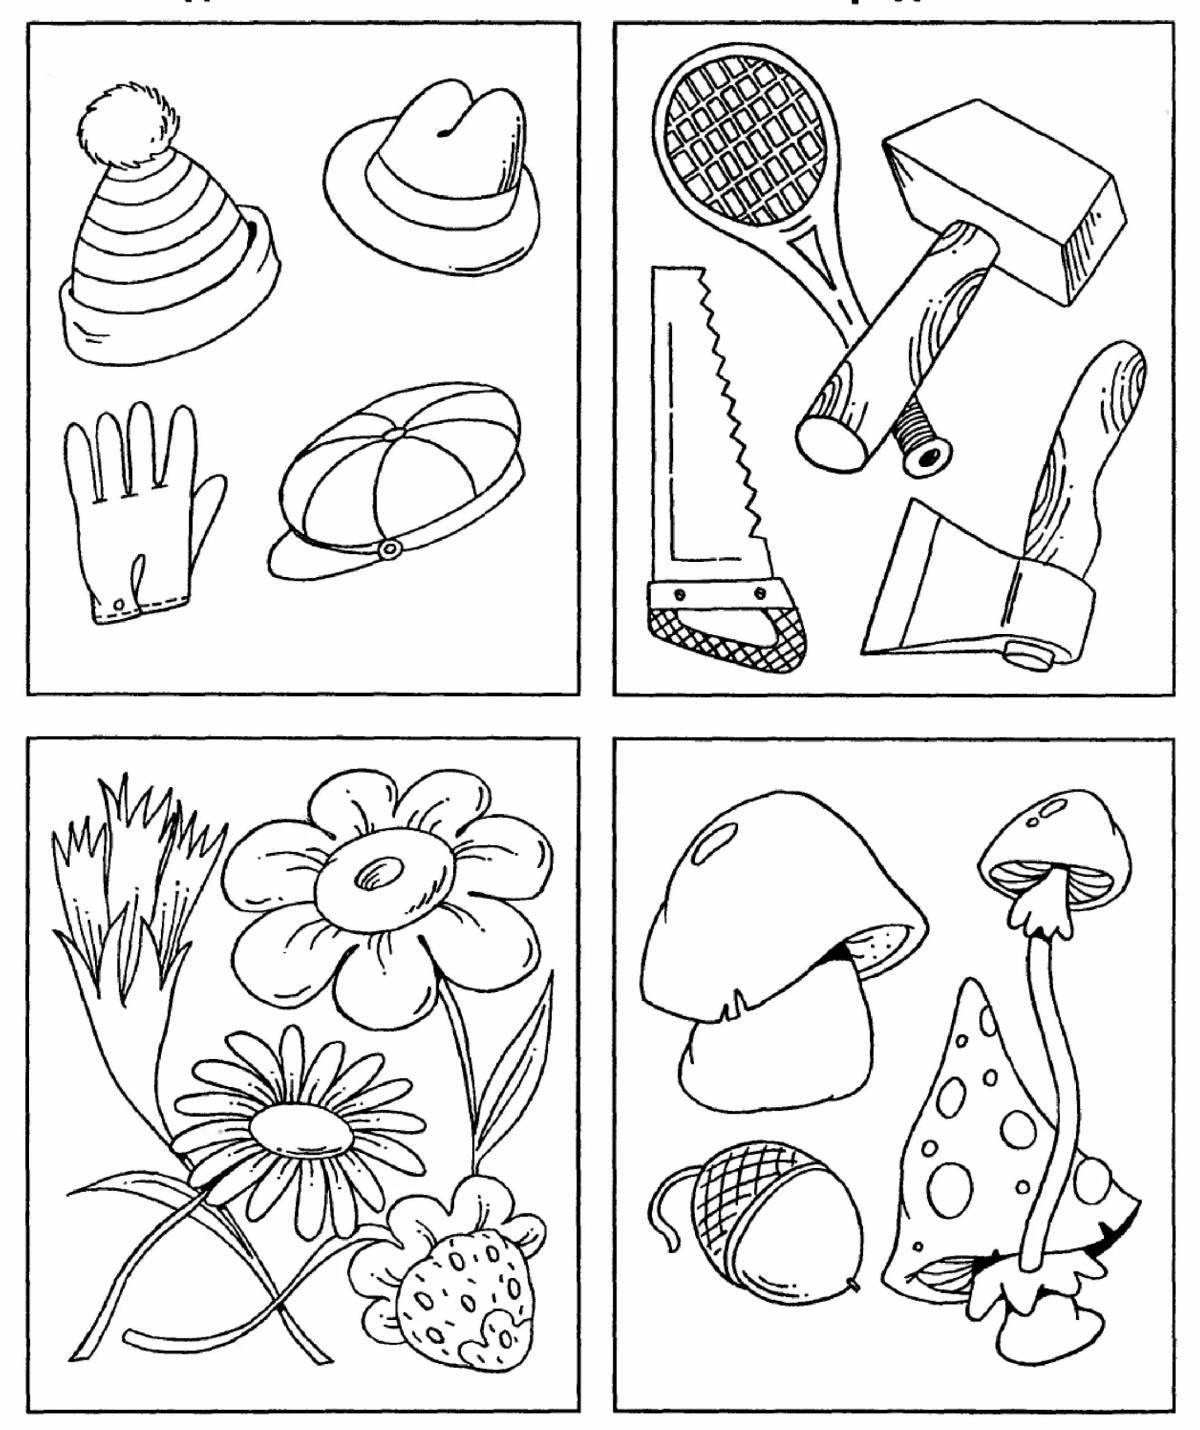 Radiant coloring page items